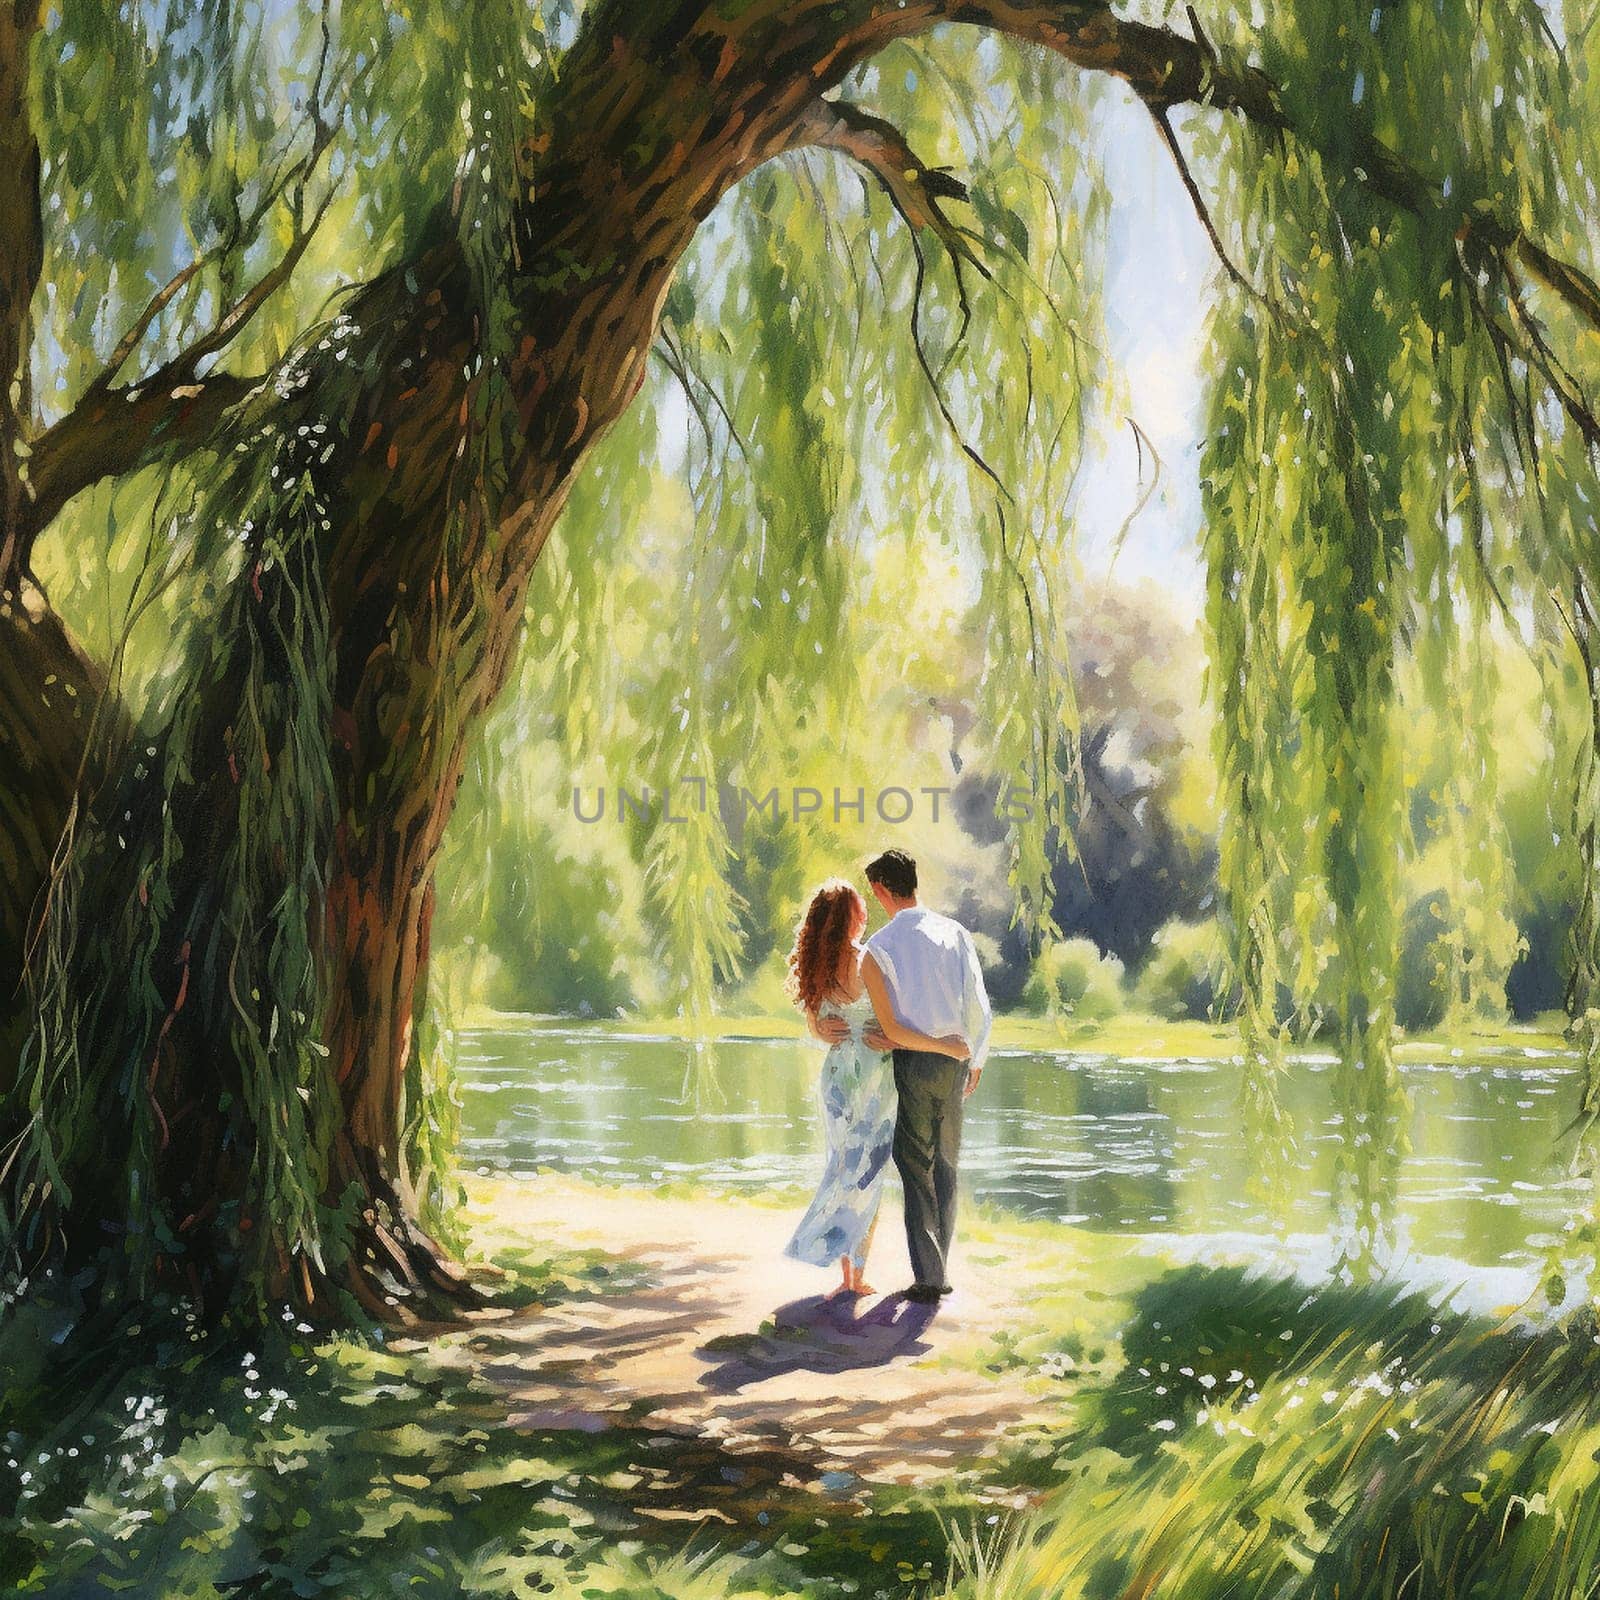 Tender Vow Exchange Beneath a Majestic Willow Tree by Sahin